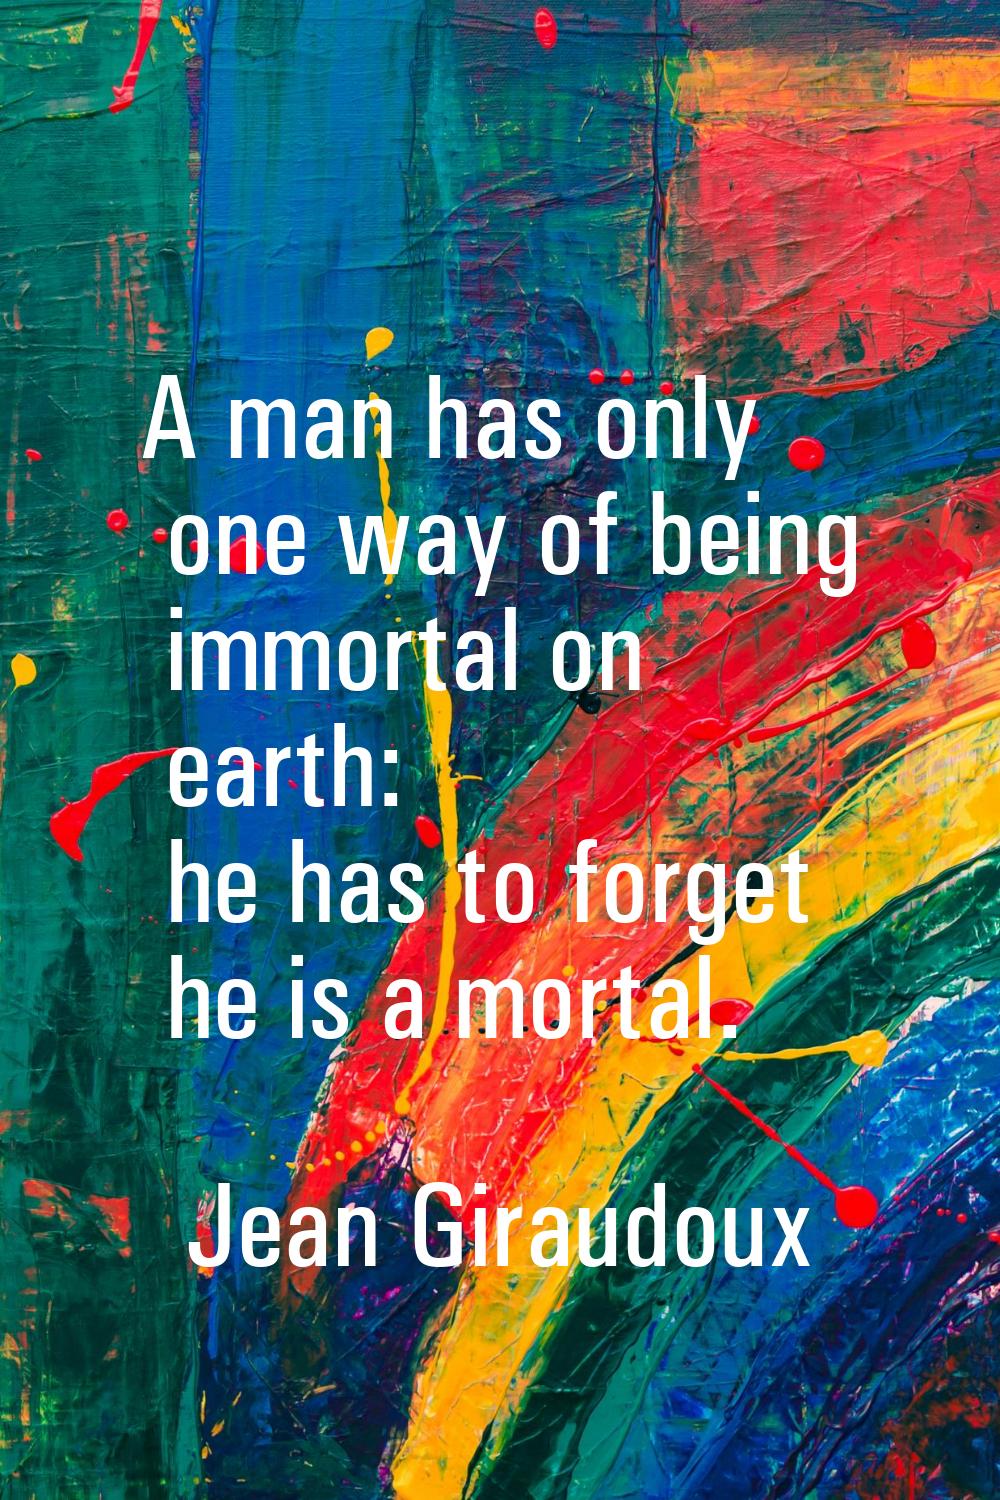 A man has only one way of being immortal on earth: he has to forget he is a mortal.